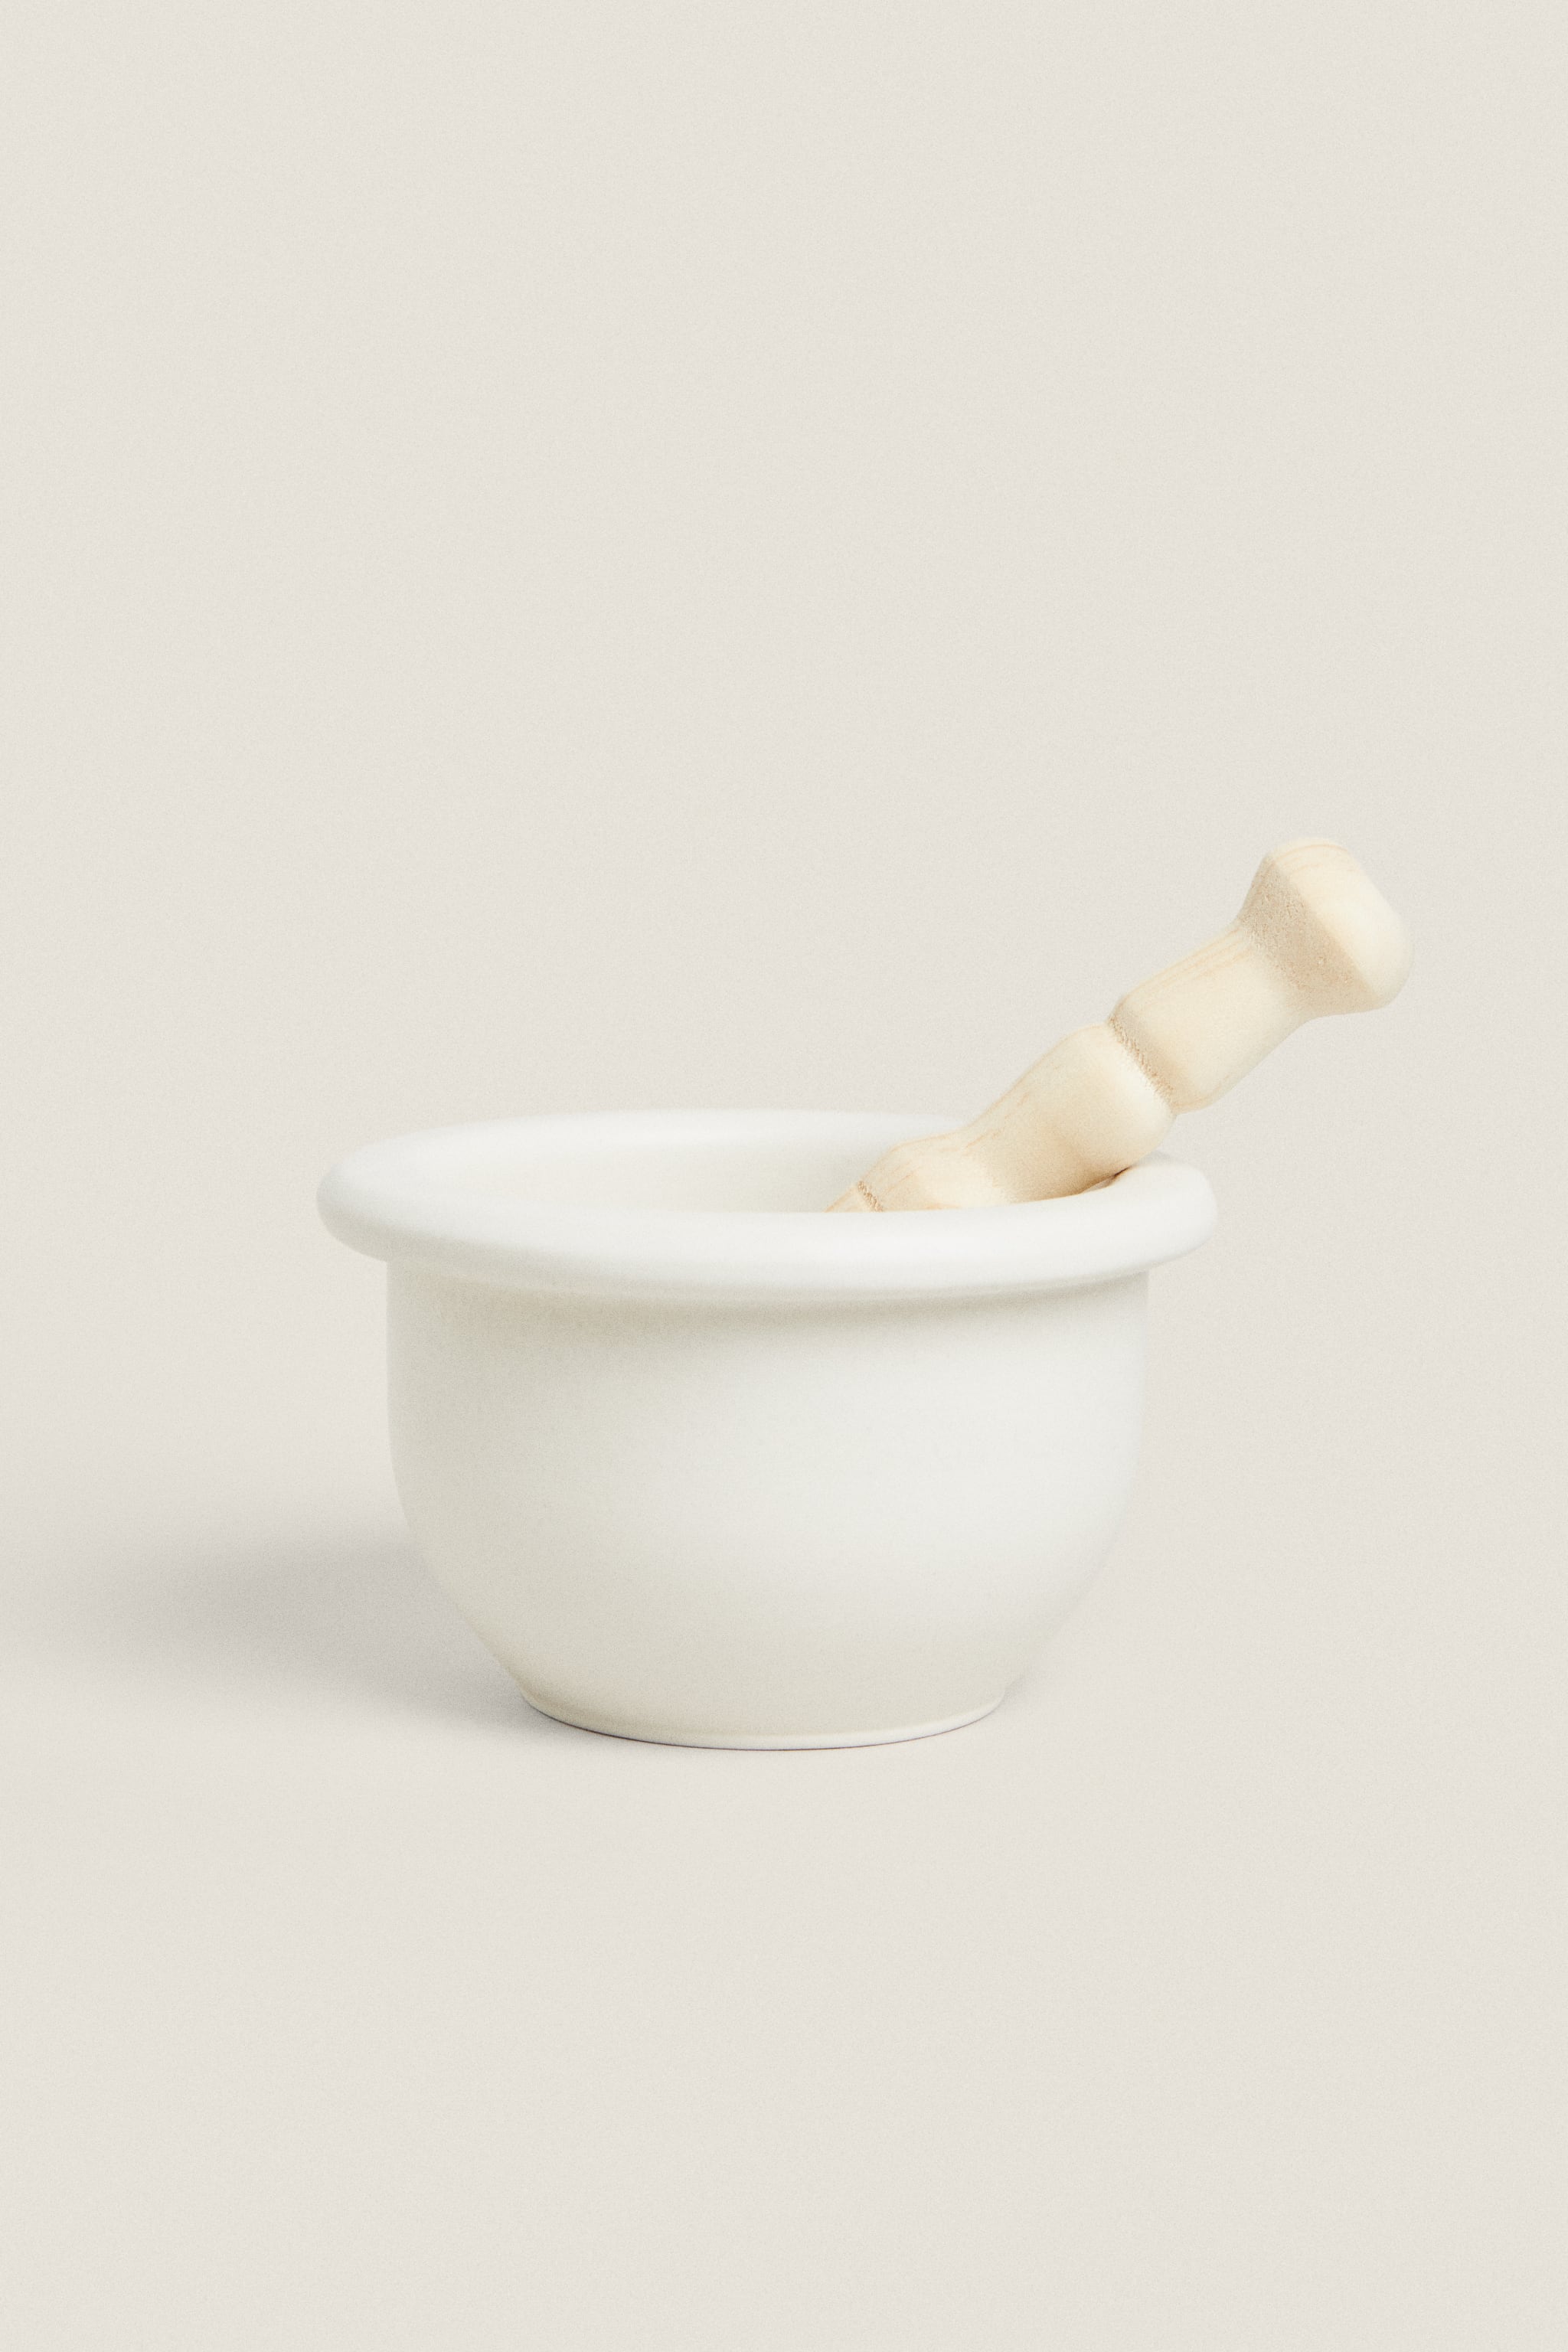 CERAMIC PESTLE AND MORTAR WITH WOODEN HANDLE